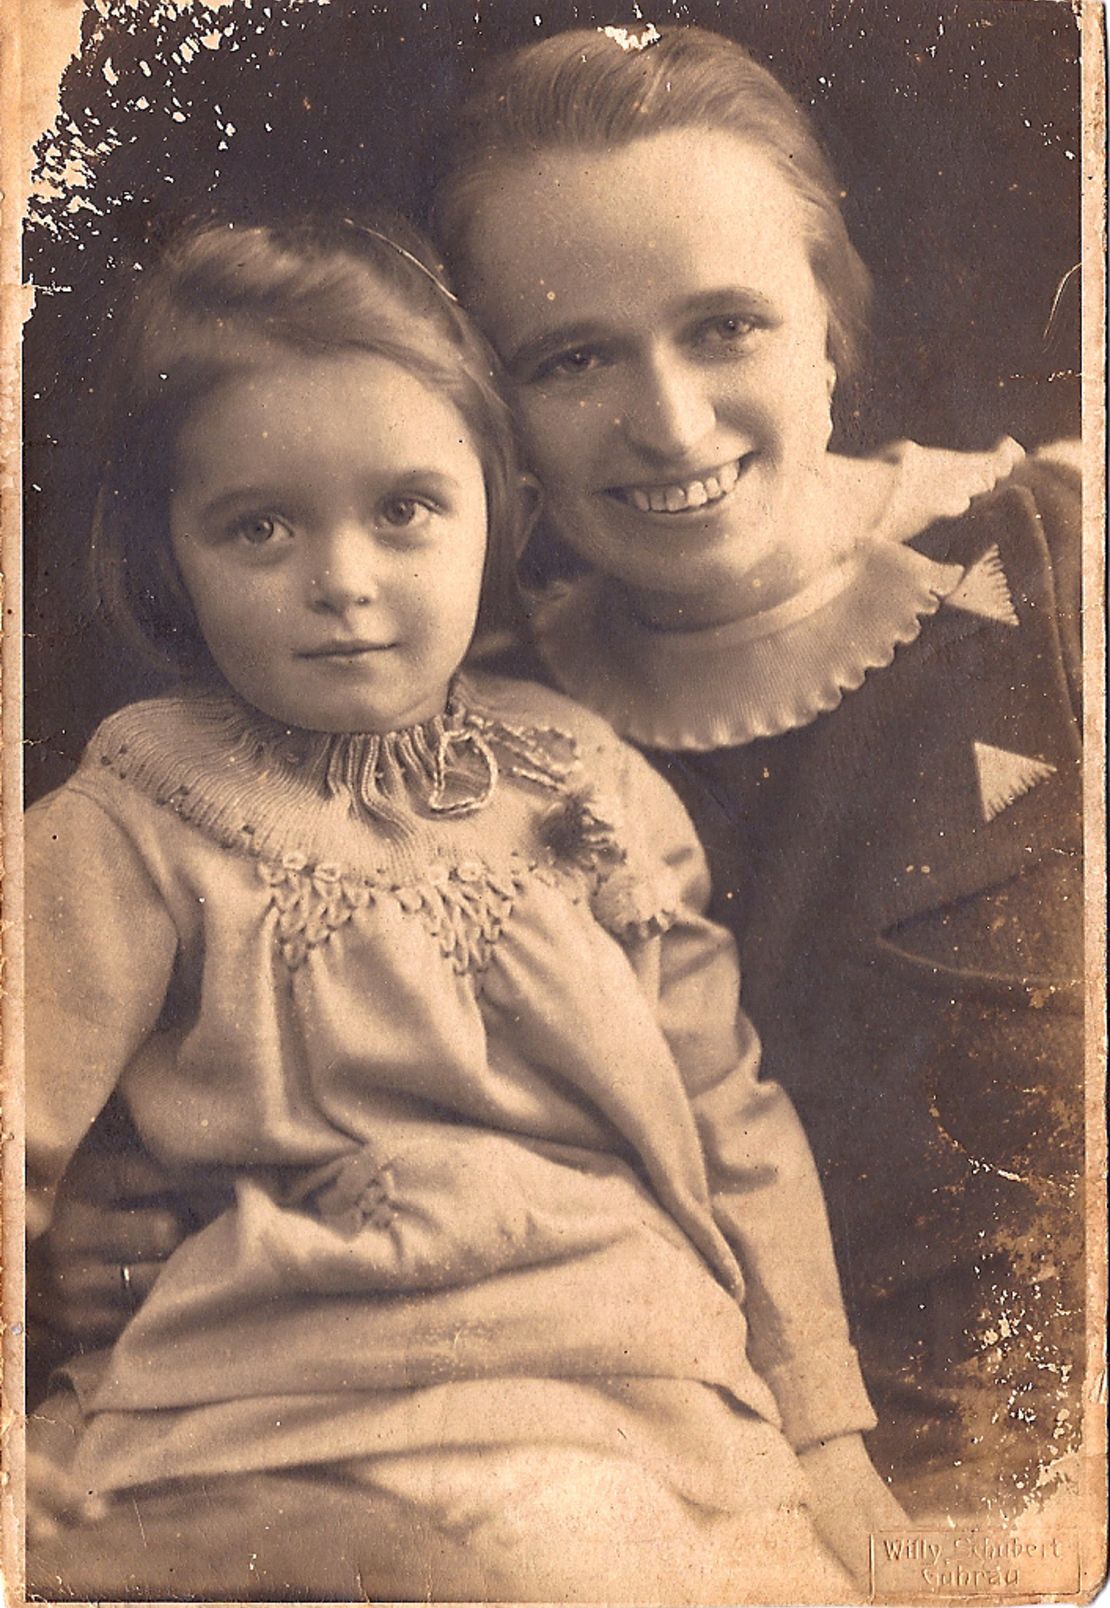 Ursula and Martha Miodowski fled the Nazis through the Philiippines in 1939. Martha's husband was Jewish, which meant that her daughter's life was also in danger.  